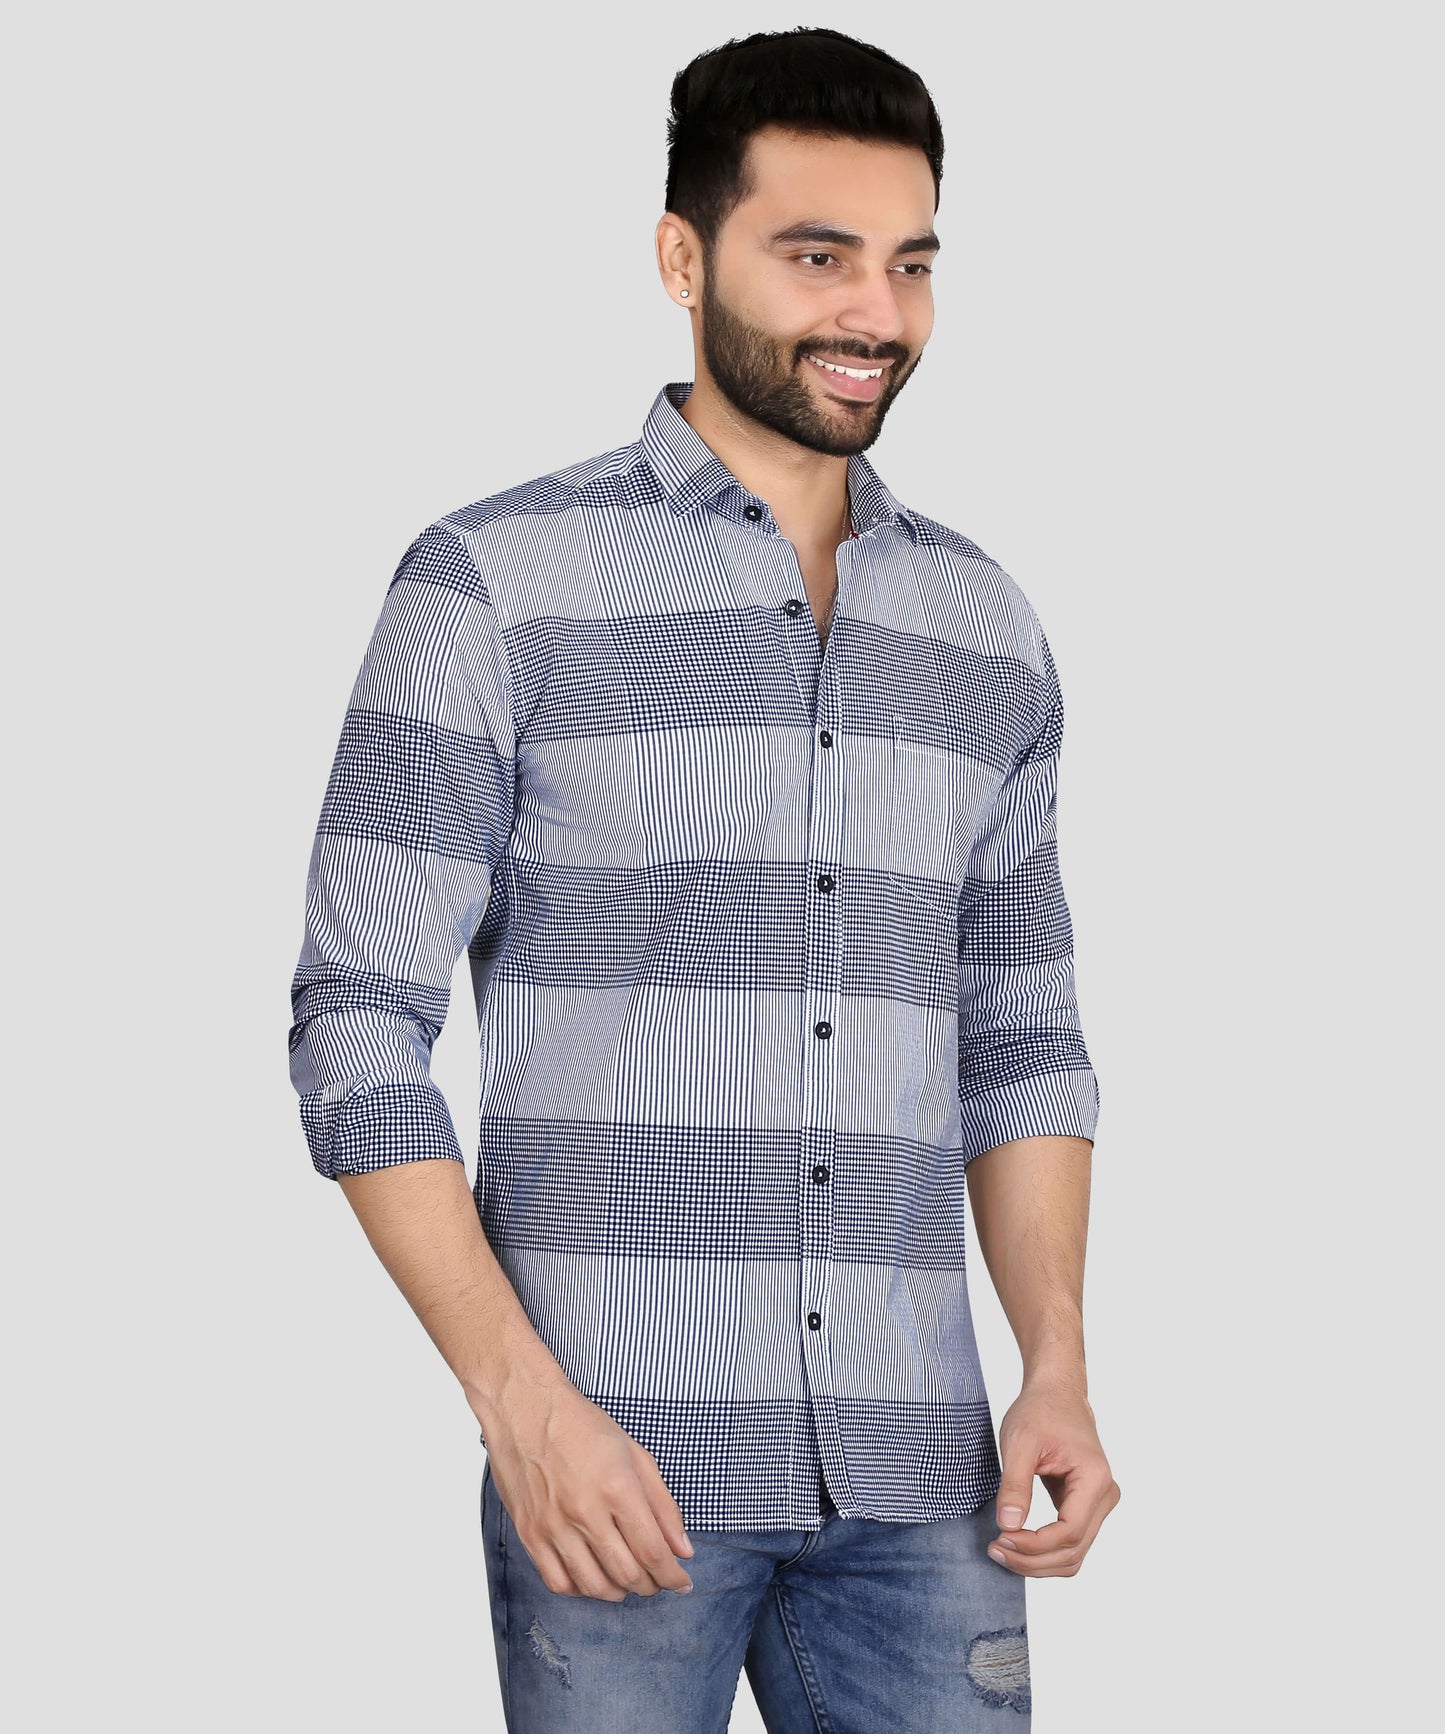 5thanfold Men's Casual Pure Cotton Full Sleeve Checkered Blue Regular Fit Shirt